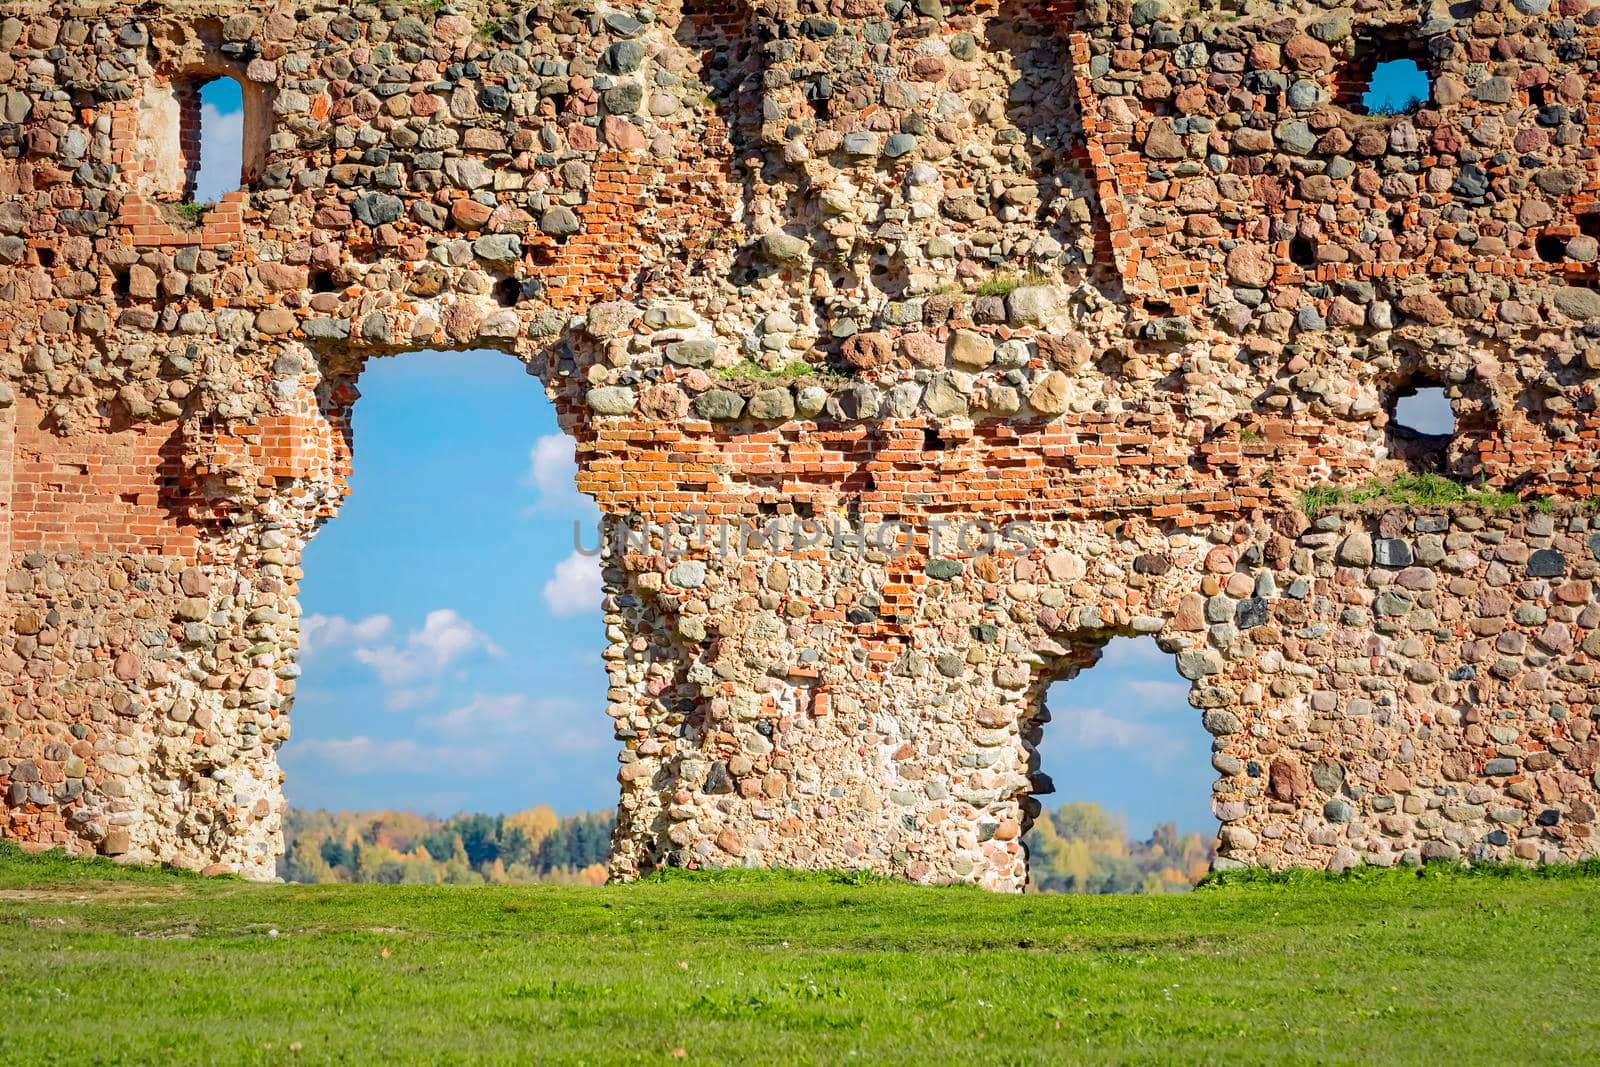 Livonian Order stronghold fortress ruins in Ludza, Latvia